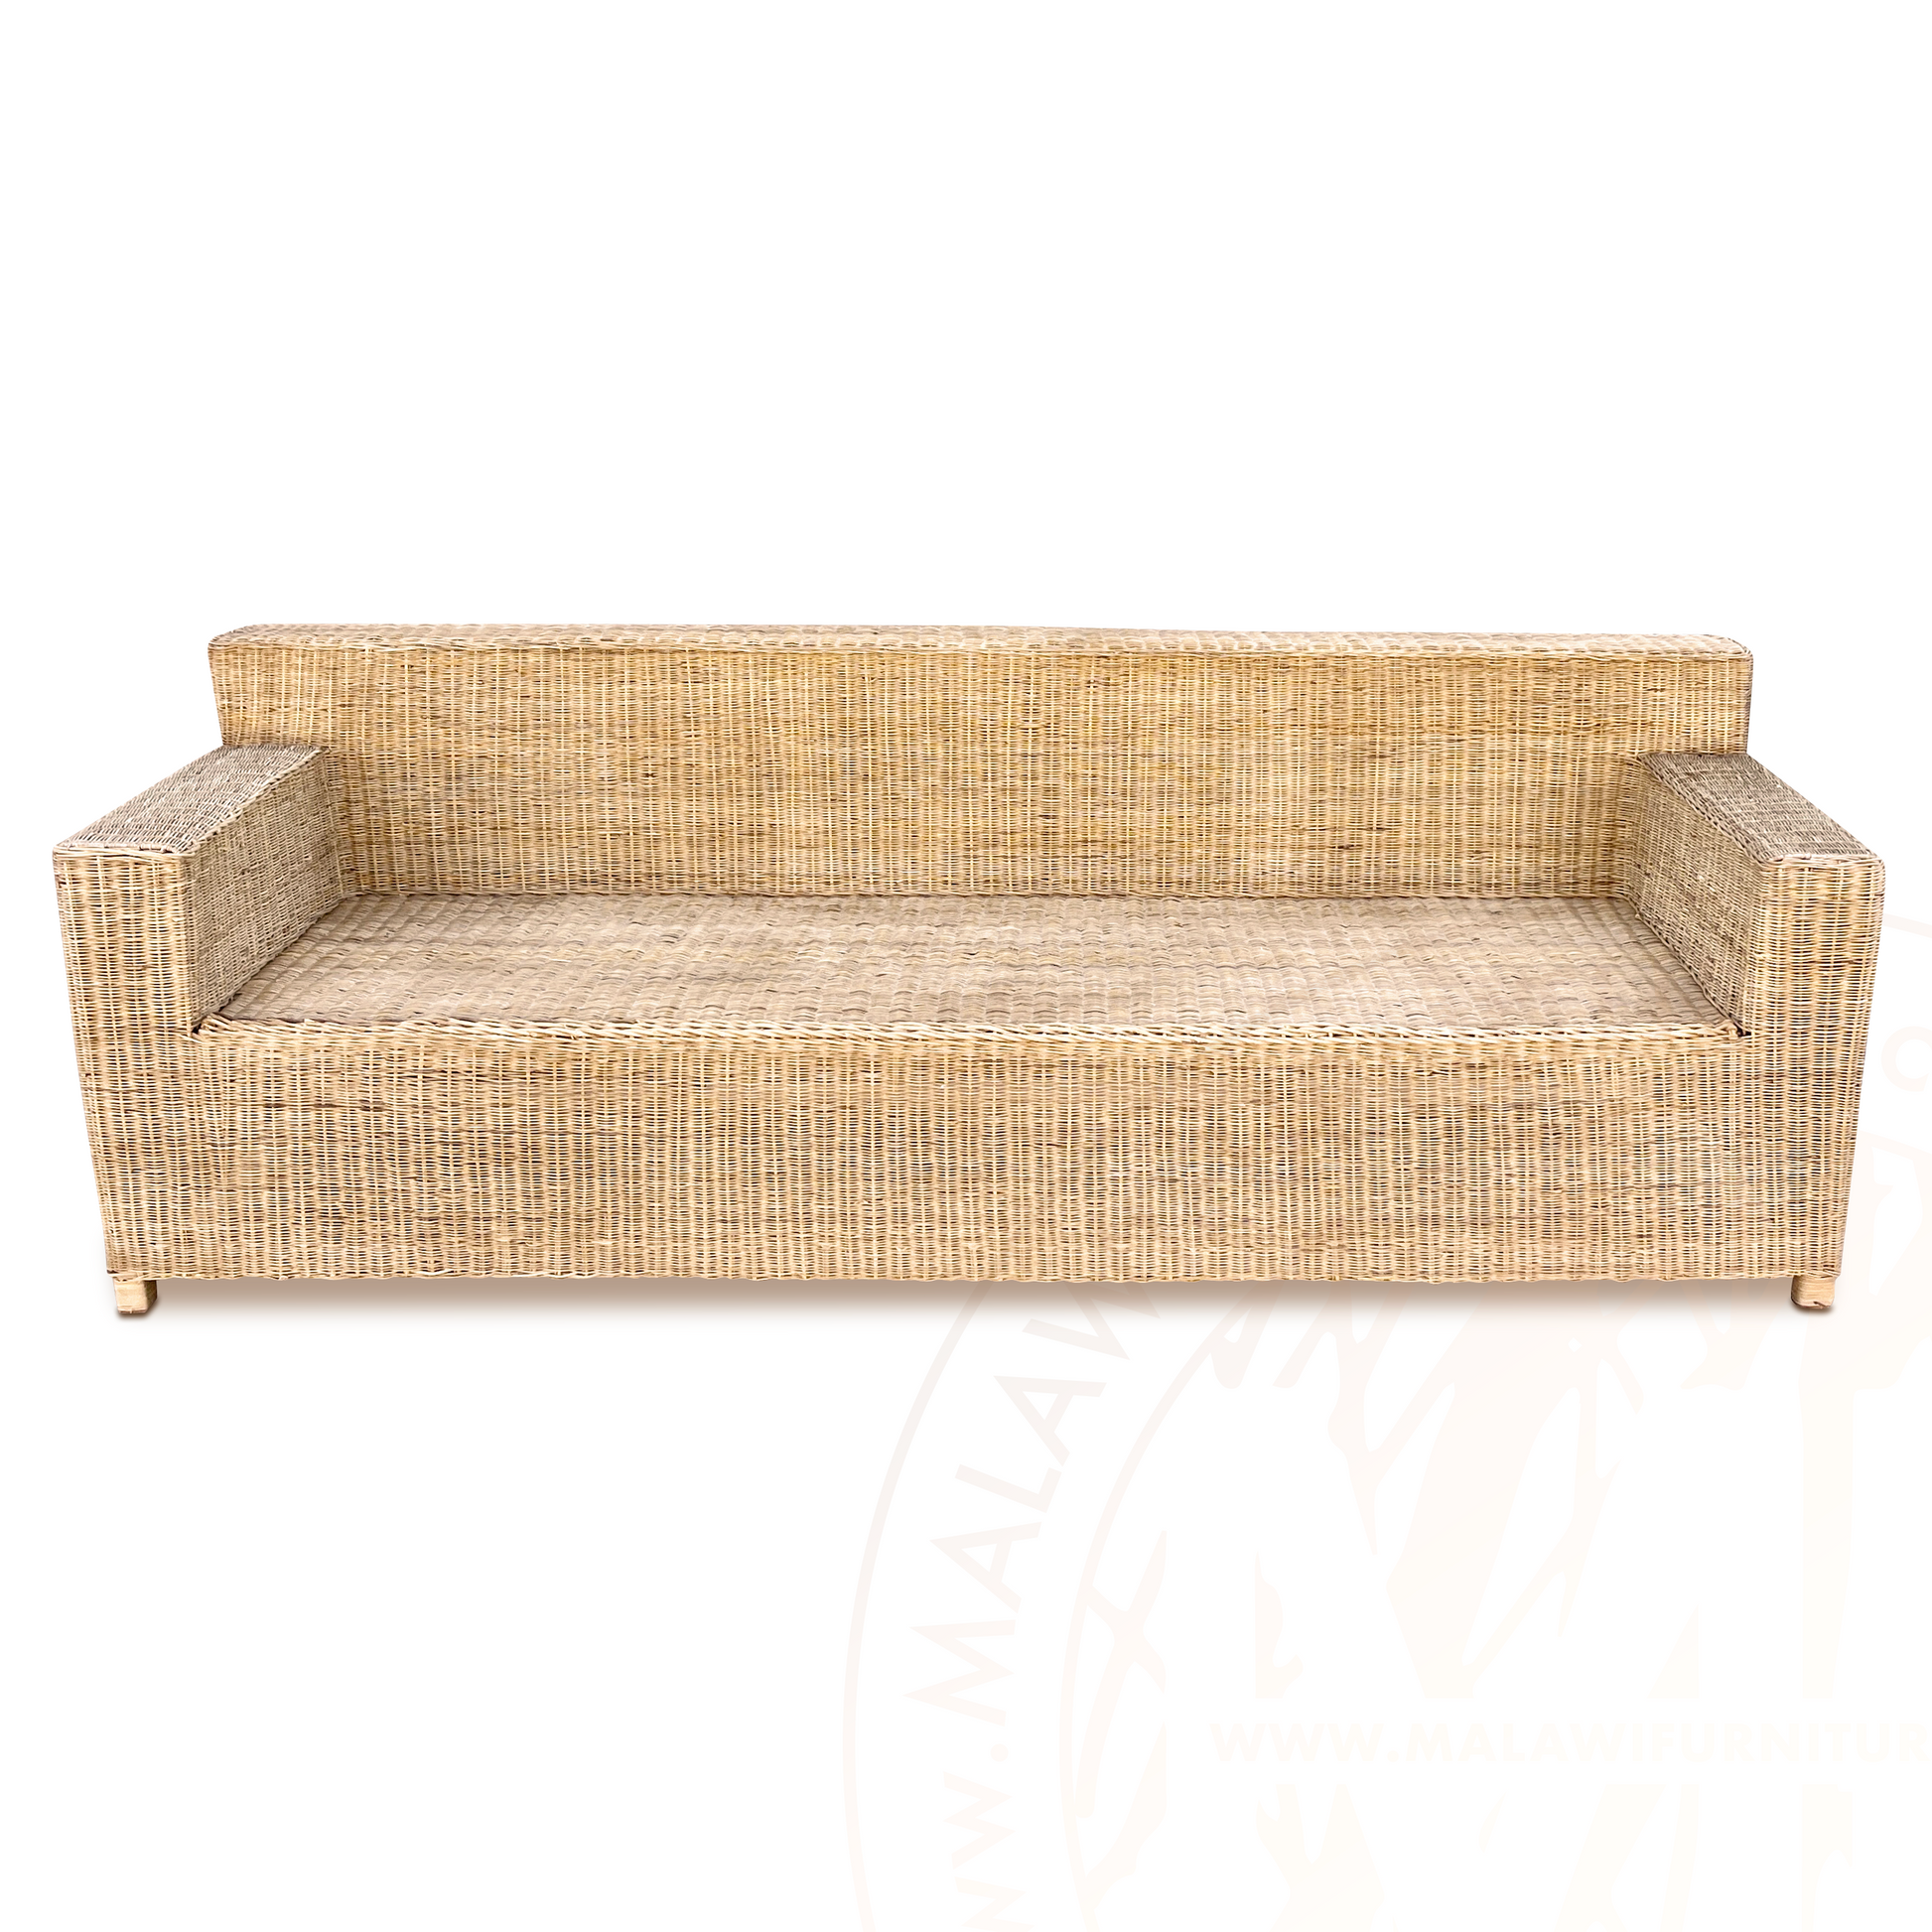 BOX Malawi Couch three Seater hand weaved woven rattan cane chair malawi with cushion